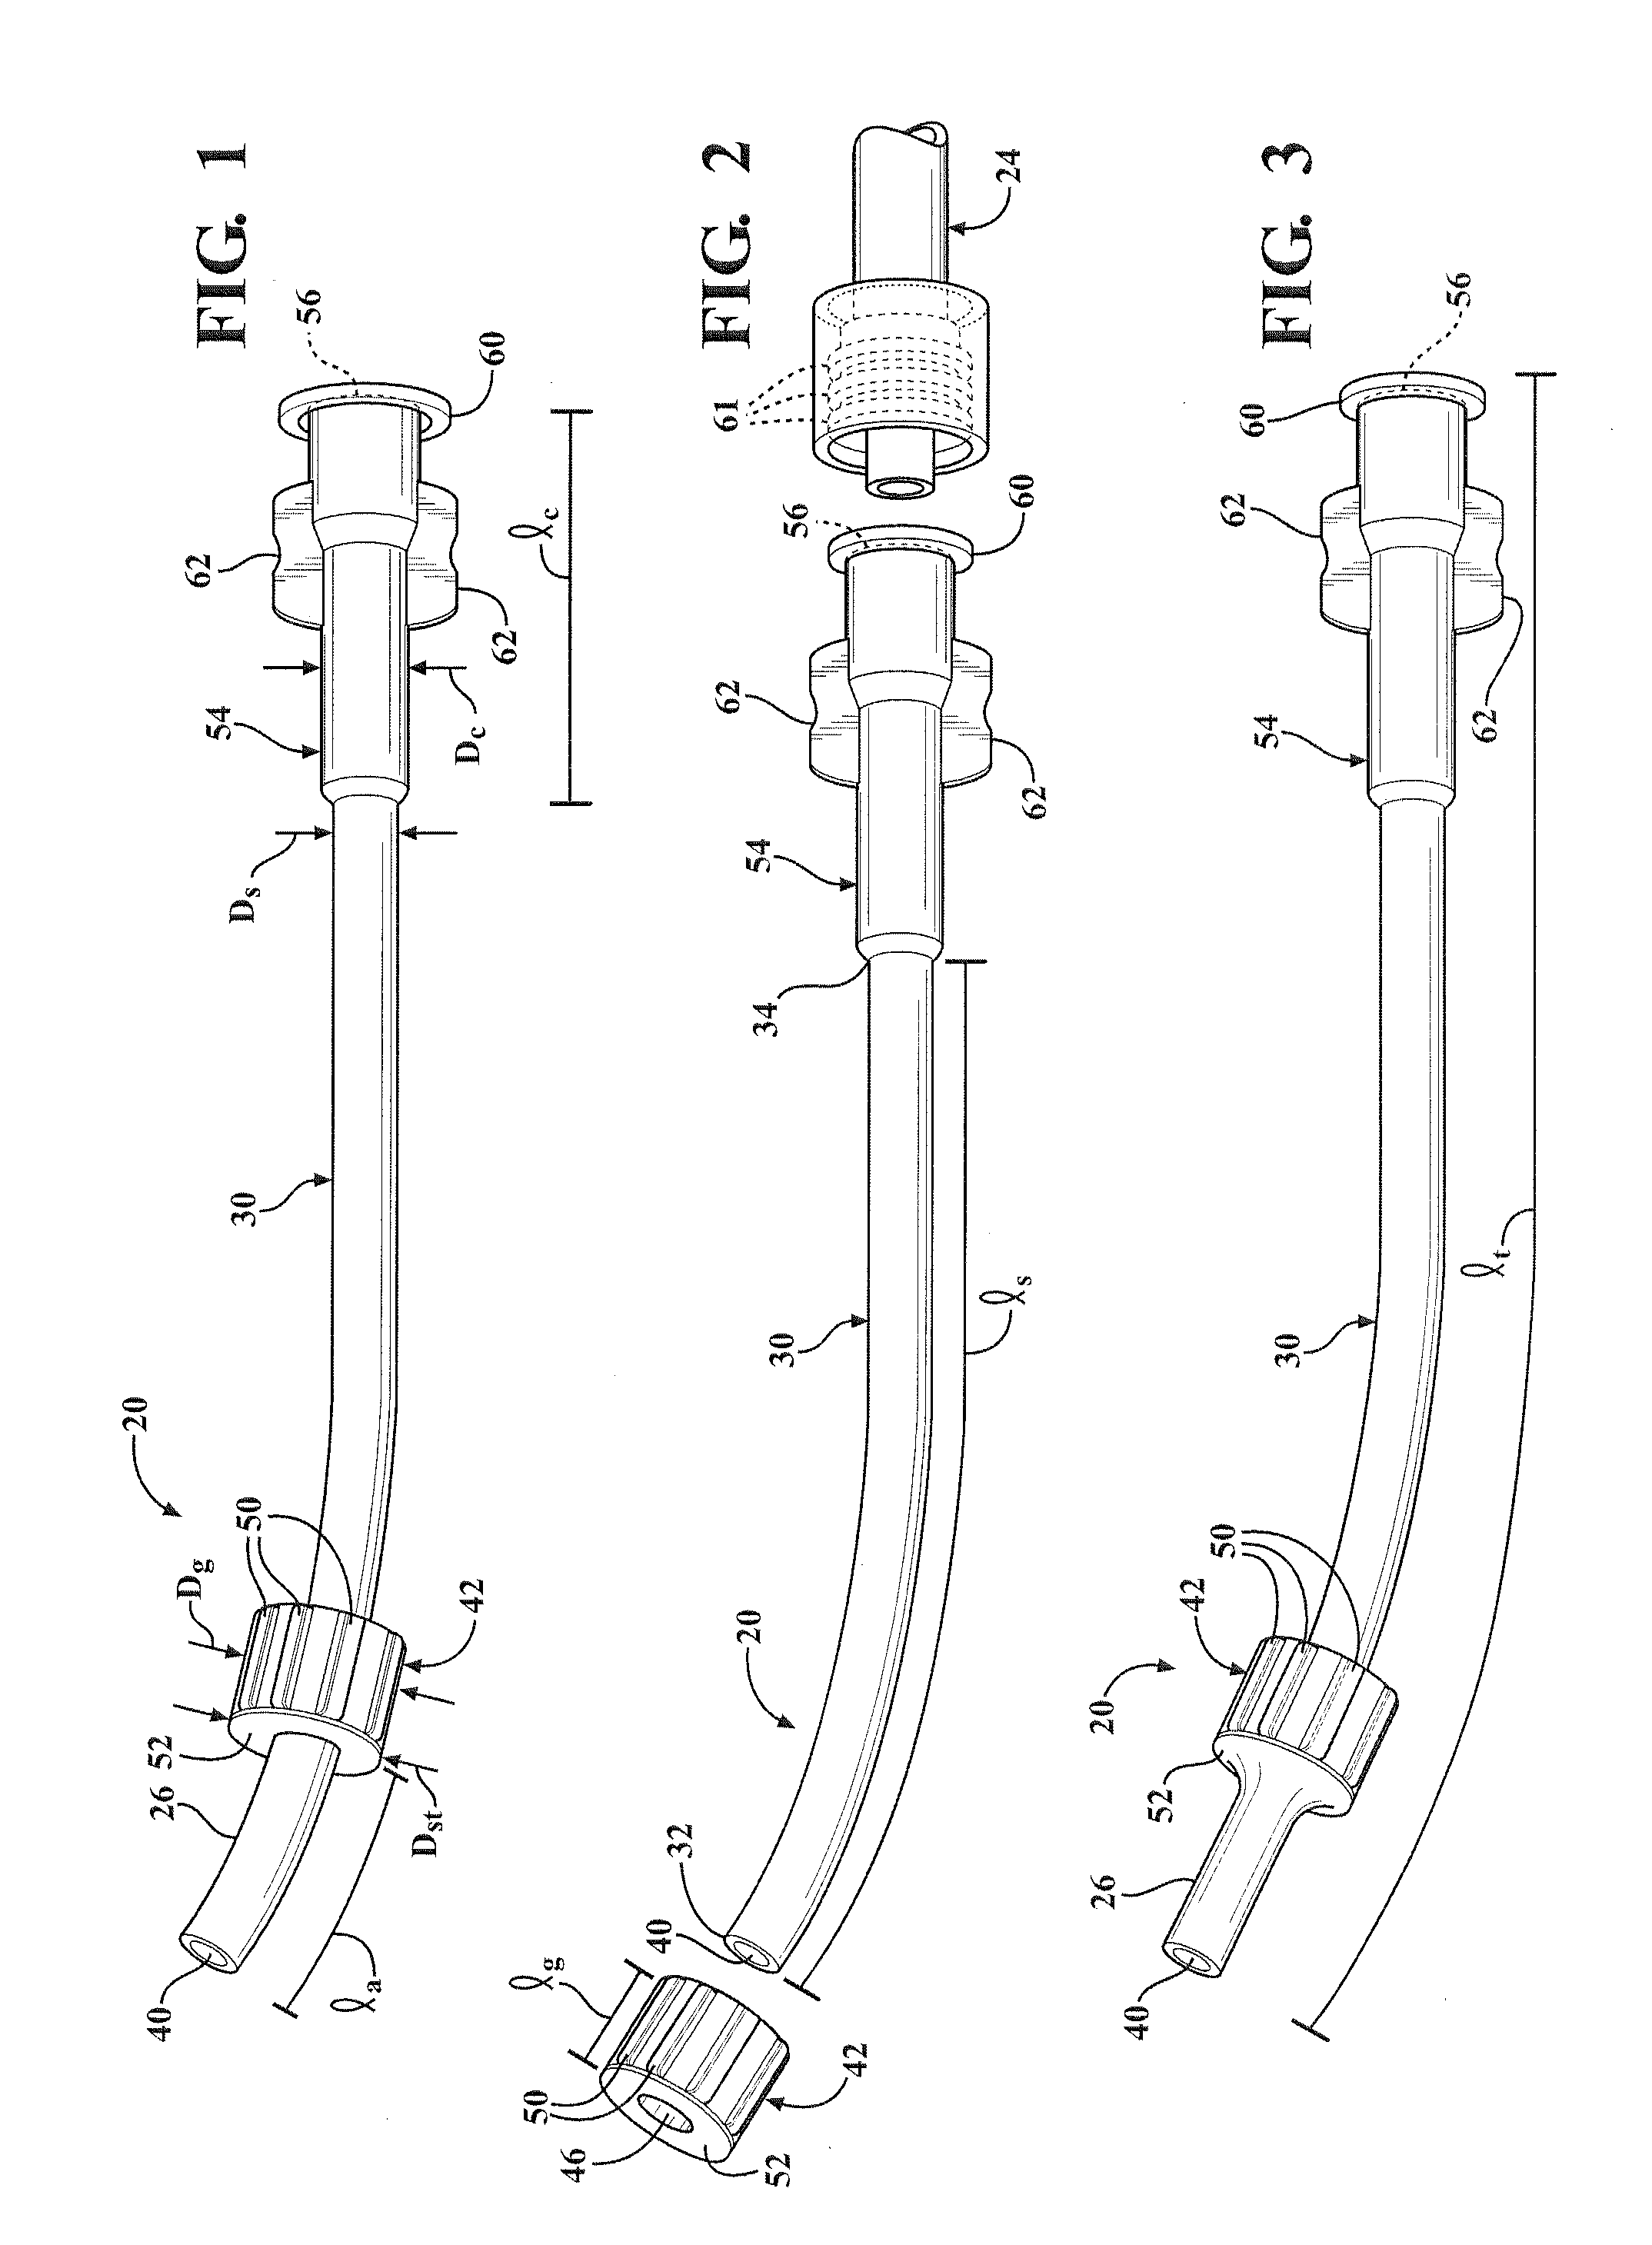 Sensor adaptor, apparatus, and method for monitoring end-tidal carbon dioxide